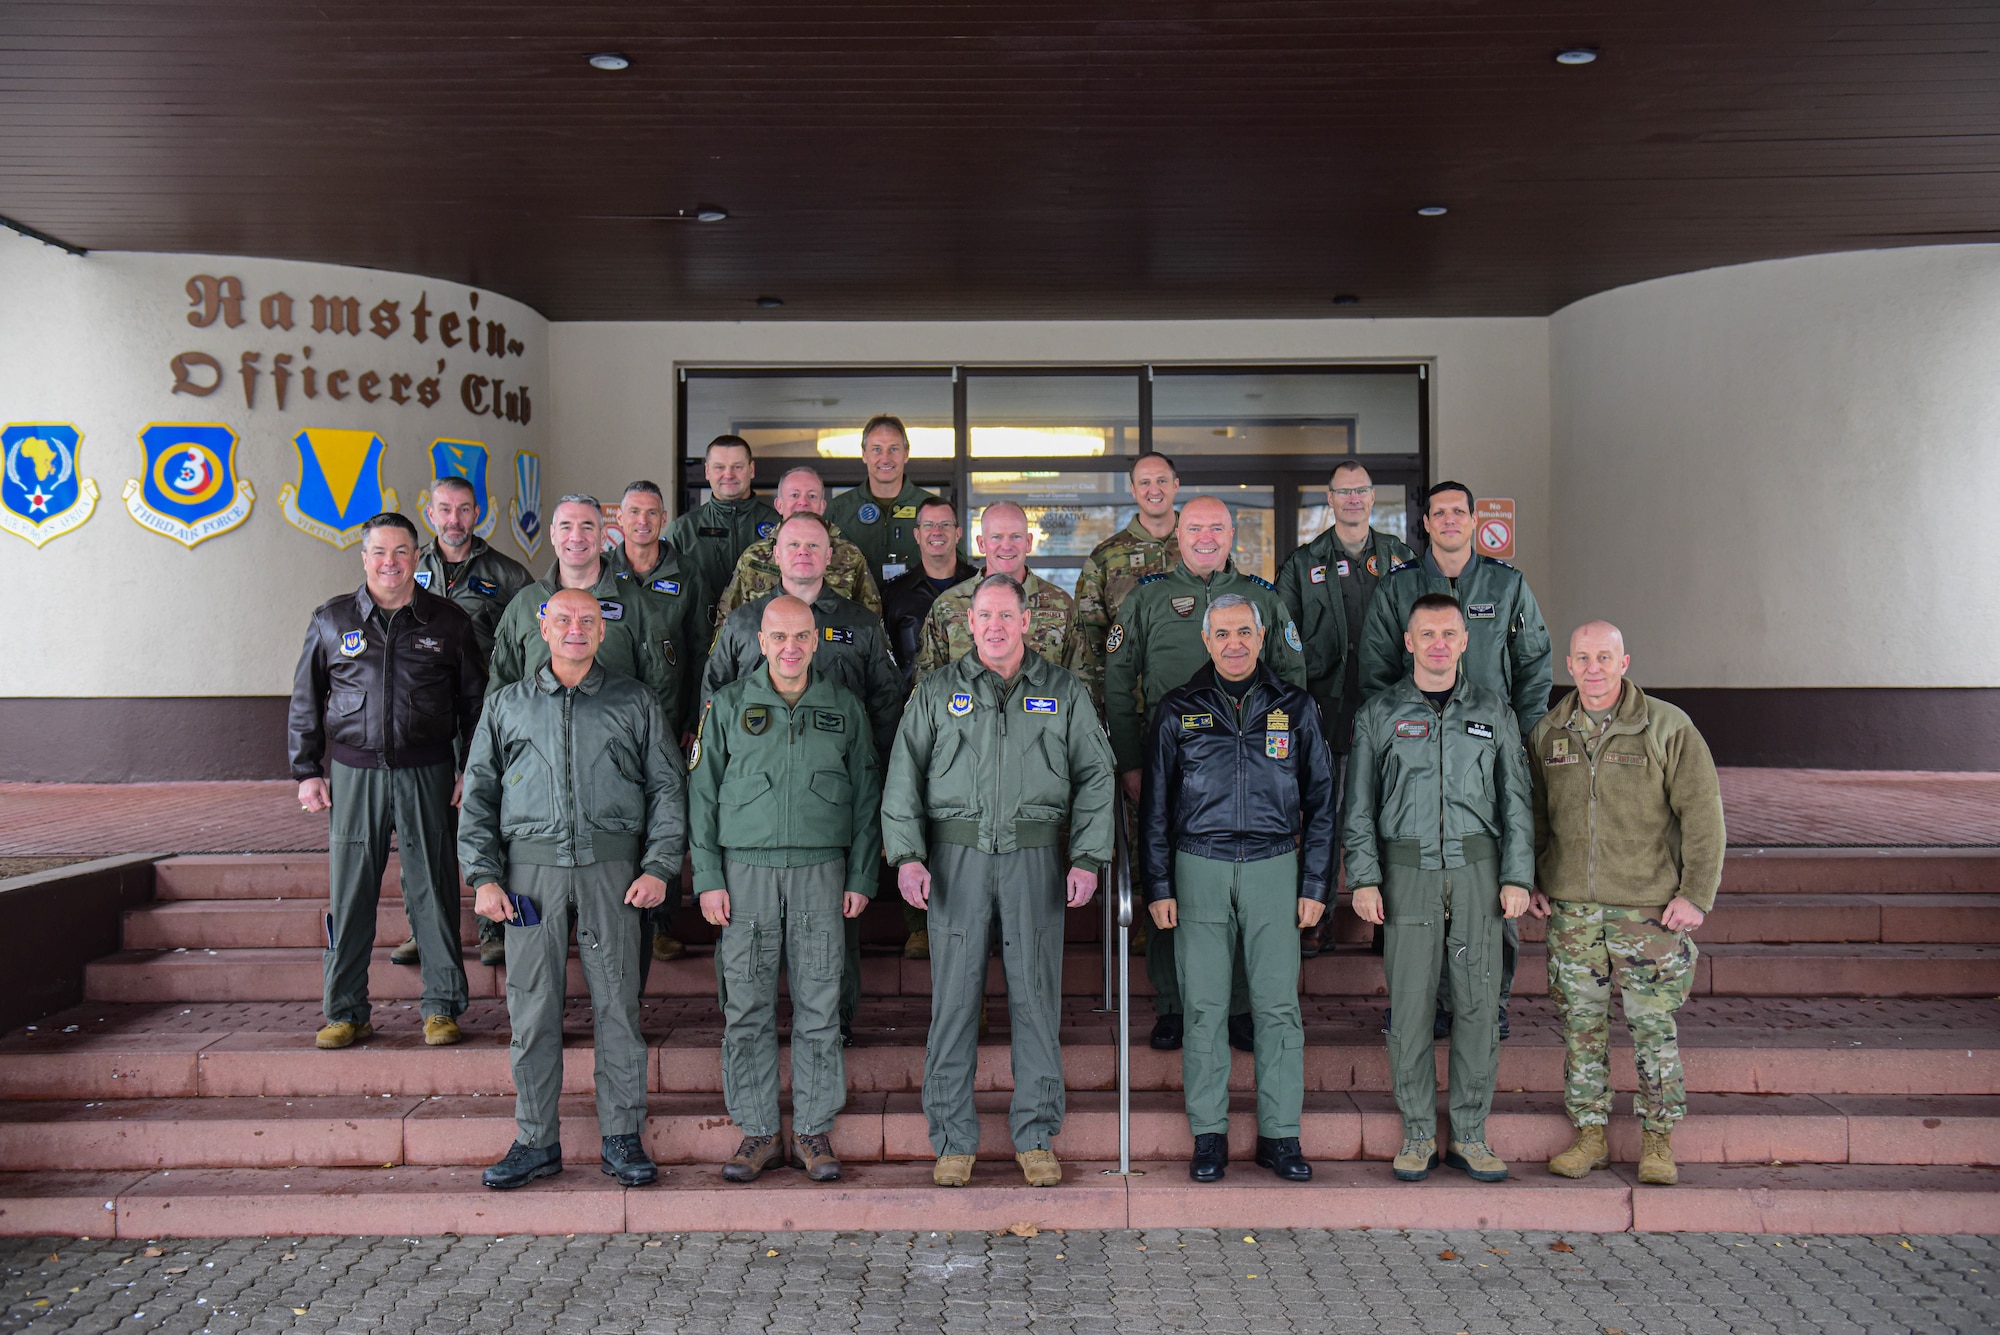 The meeting served as a platform for Air Chiefs and officials to engage in constructive dialogue, pooling together their expertise and experiences.